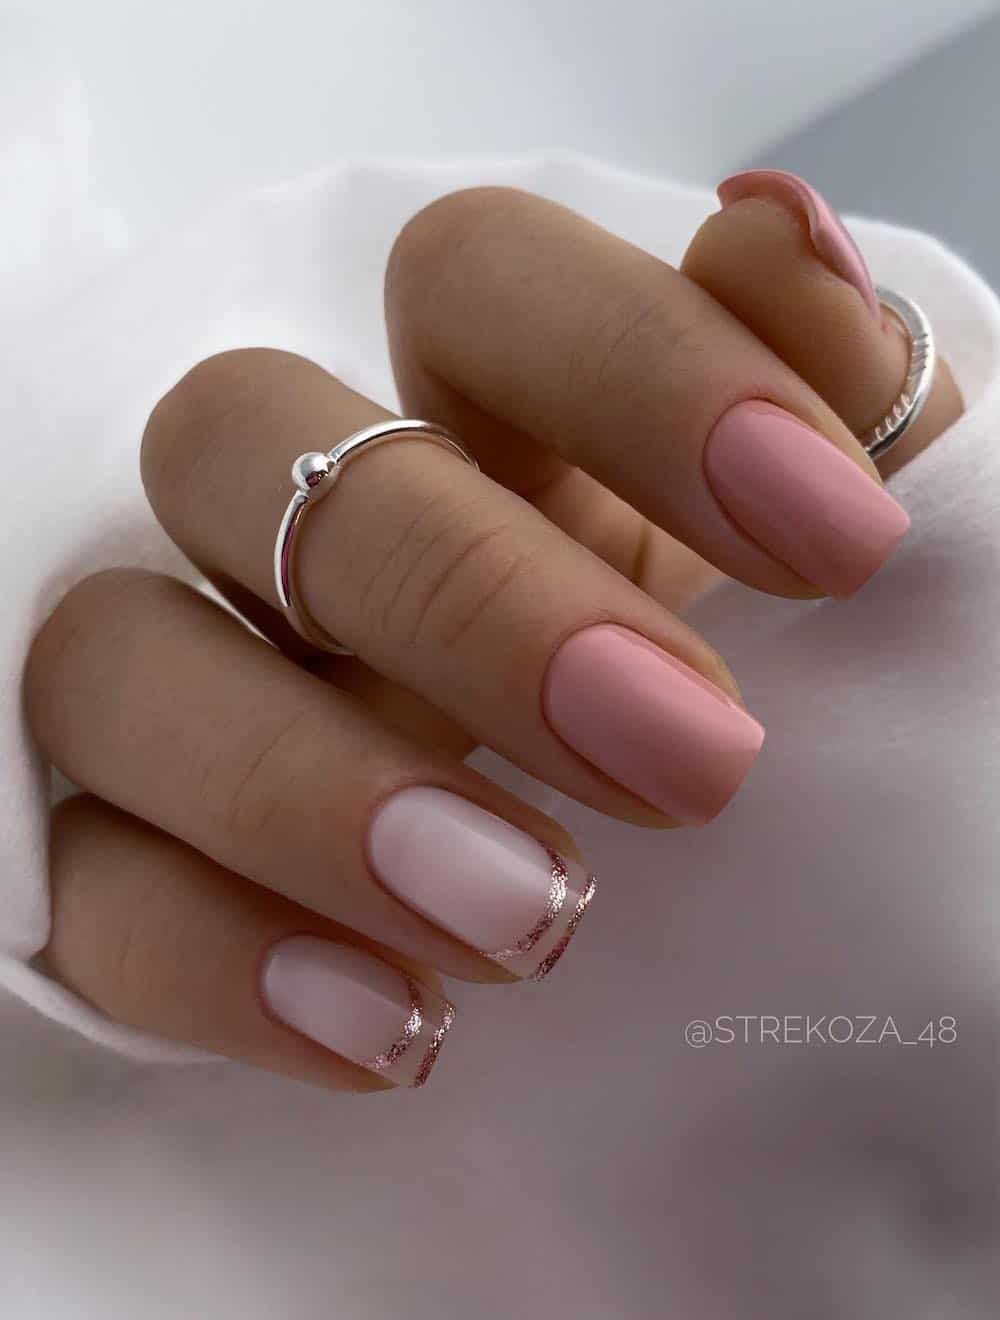 A hand with short square nails painted a dusty pink with two milky white accent nails featuring glittering rose gold French tip outlines